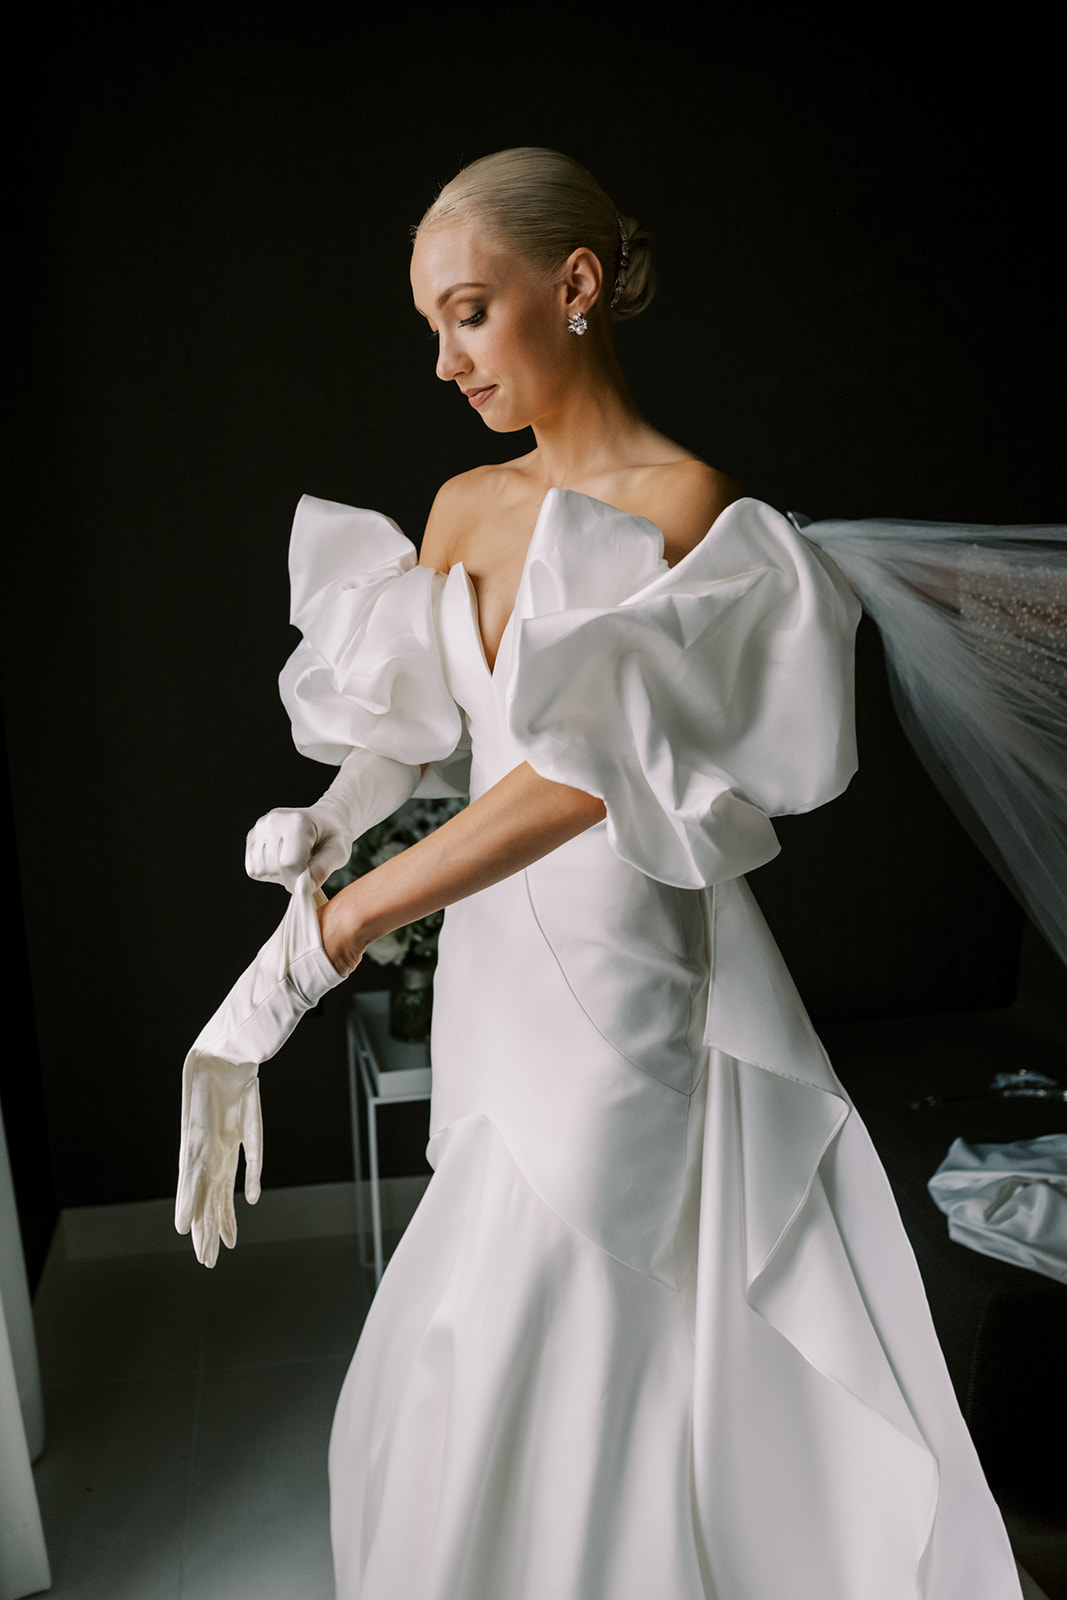 Bride puts on elegant gloves while getting ready at the Hotel Washington